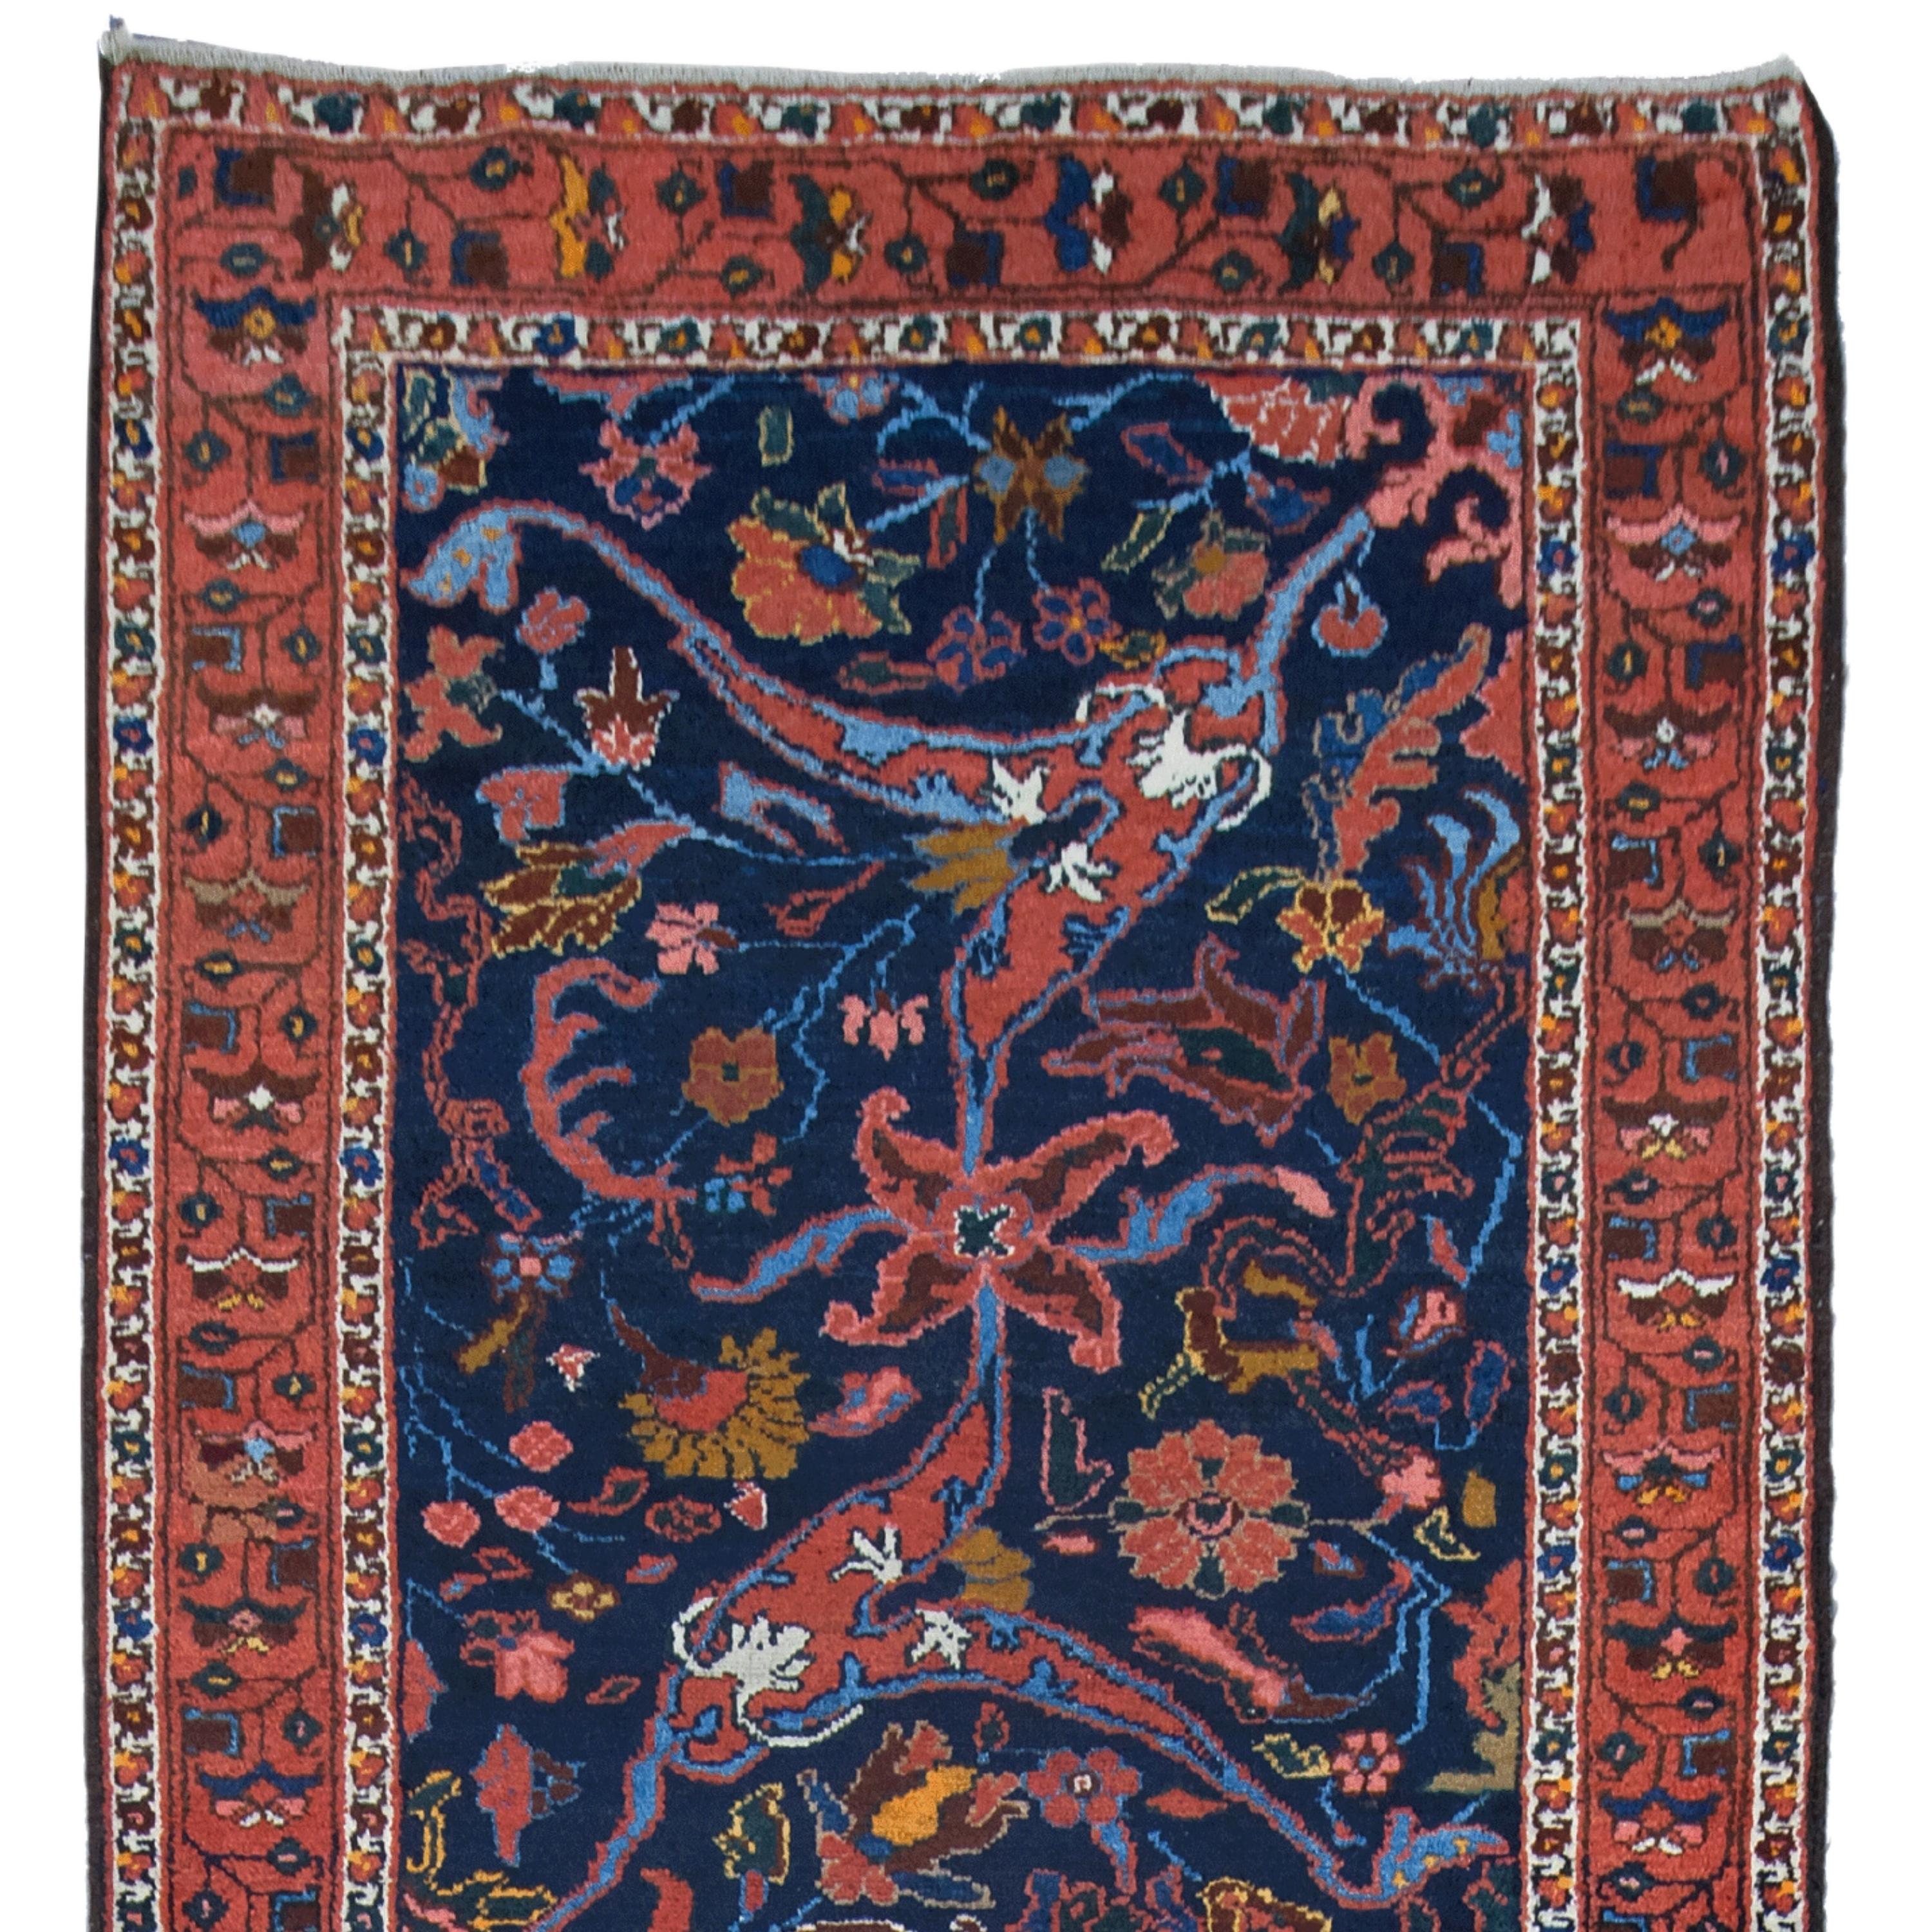 This extraordinary runner will fascinate you with its intricate designs and vibrant colors that reflect the rich history and craftsmanship of the period. Each stitch tells the story of skilled craftsmen who masterfully crafted every detail. The dark